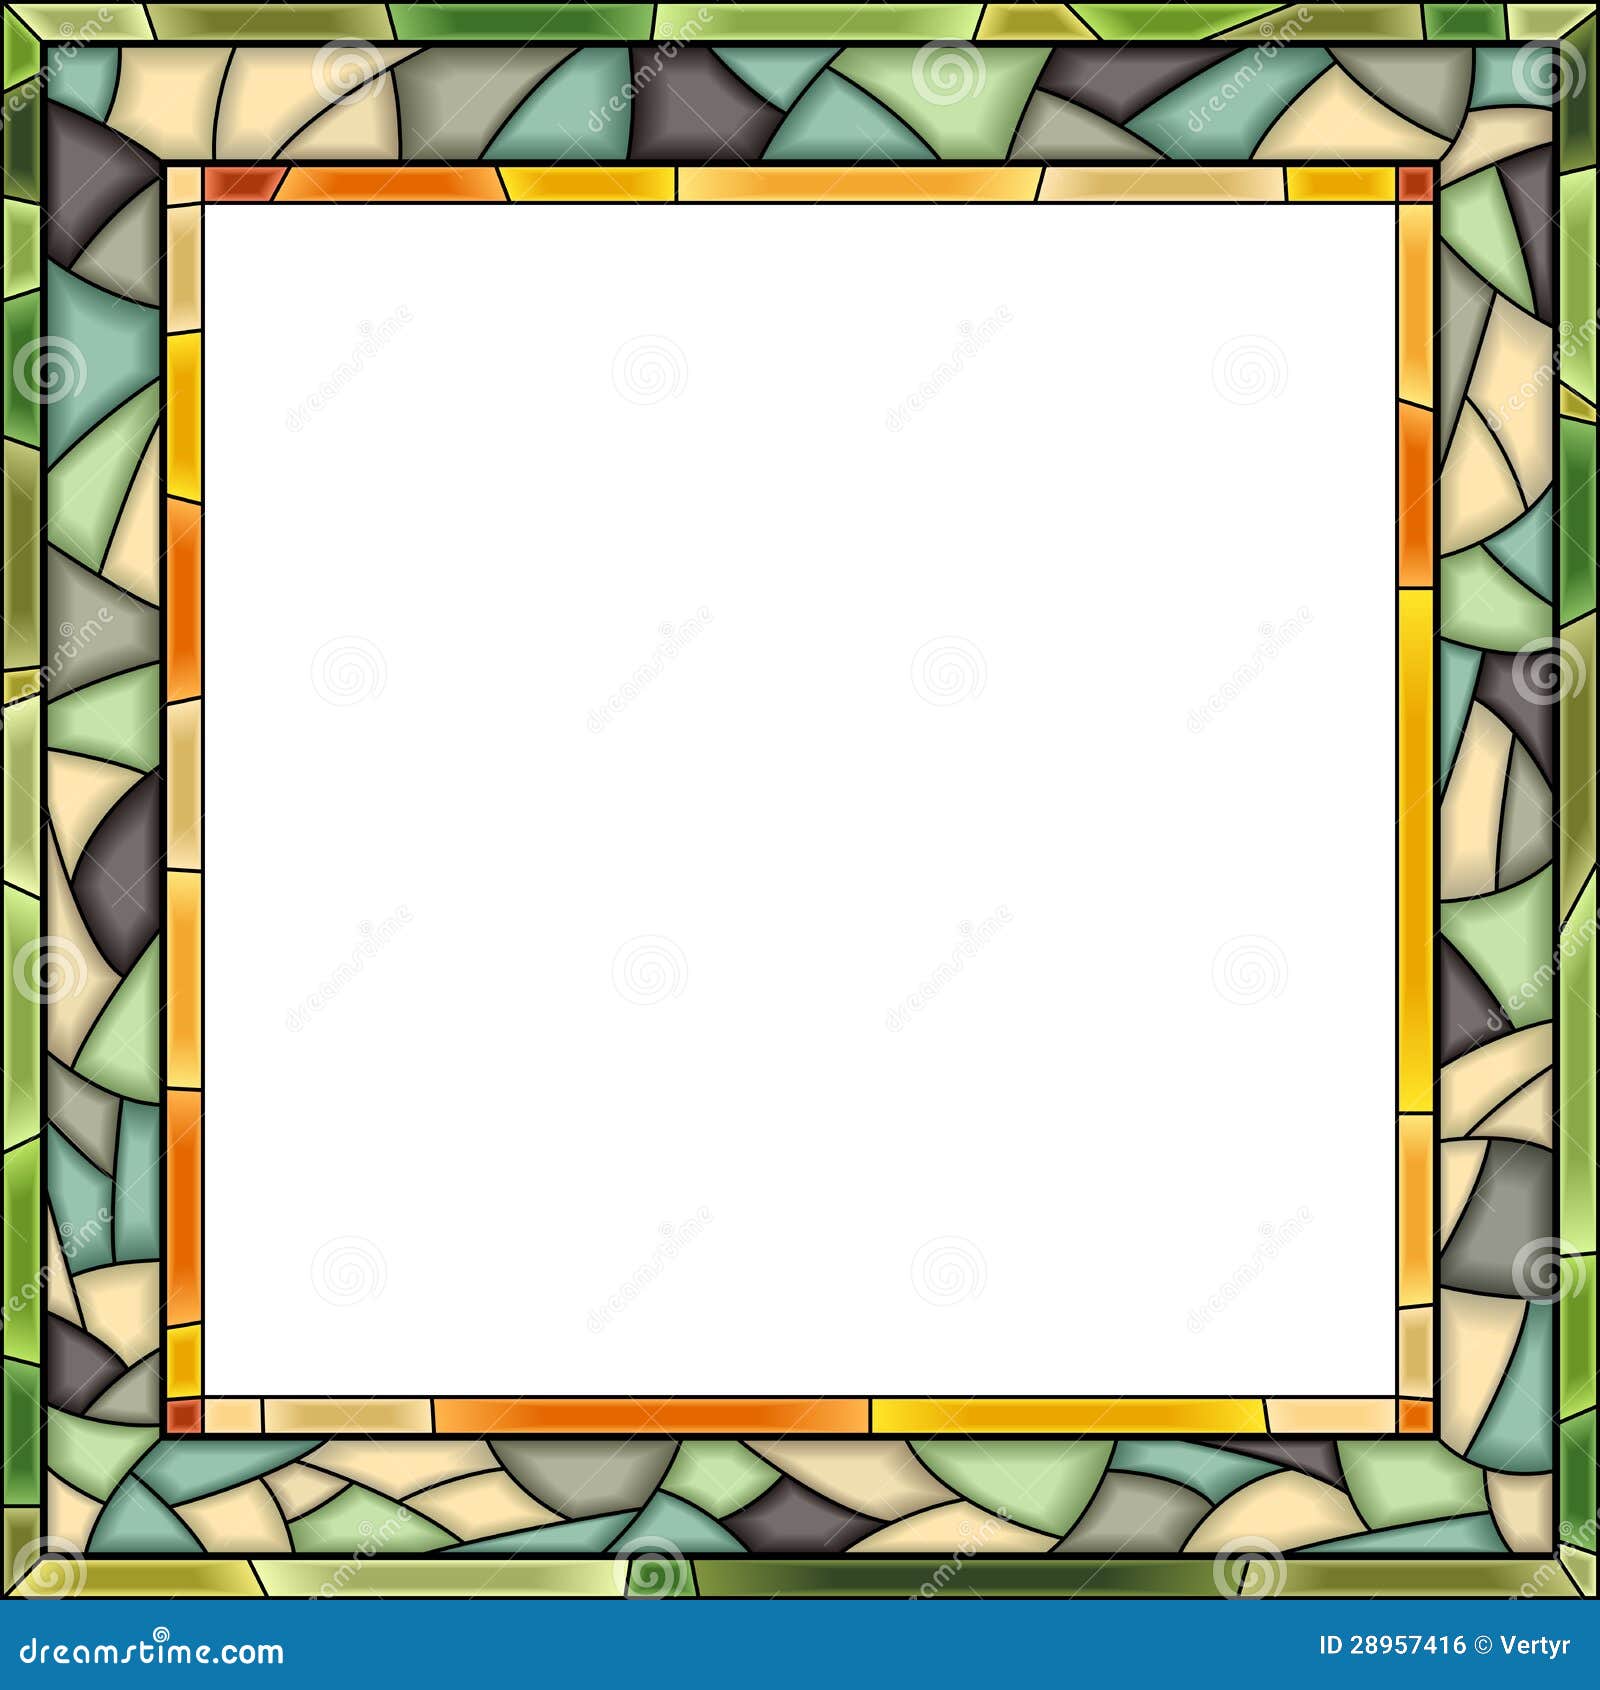 stained glass clip art borders - photo #25